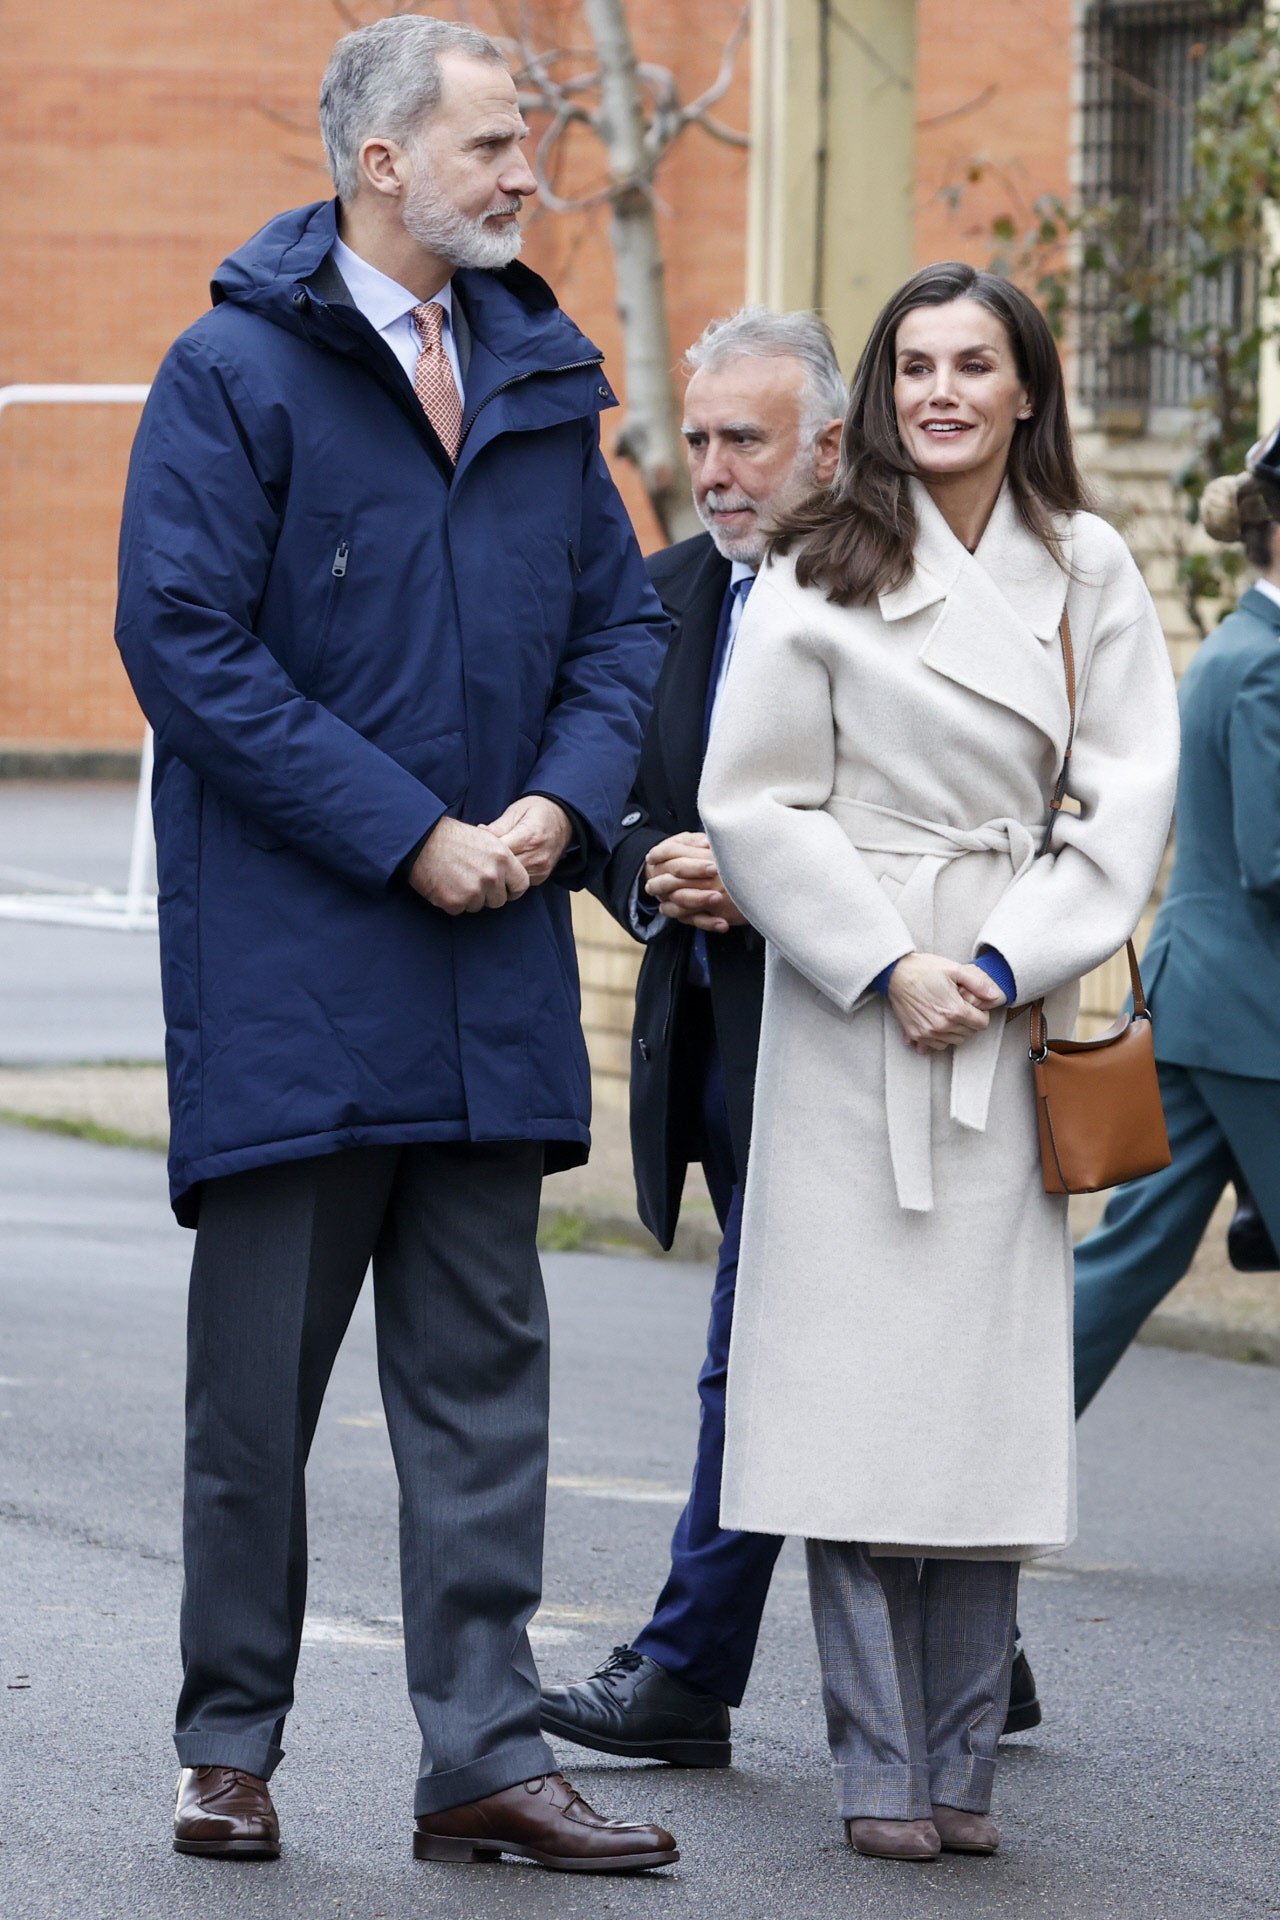 The King and Queen of Spain Visit the CEIP Gumersindo Azcárate Schoo in Leon